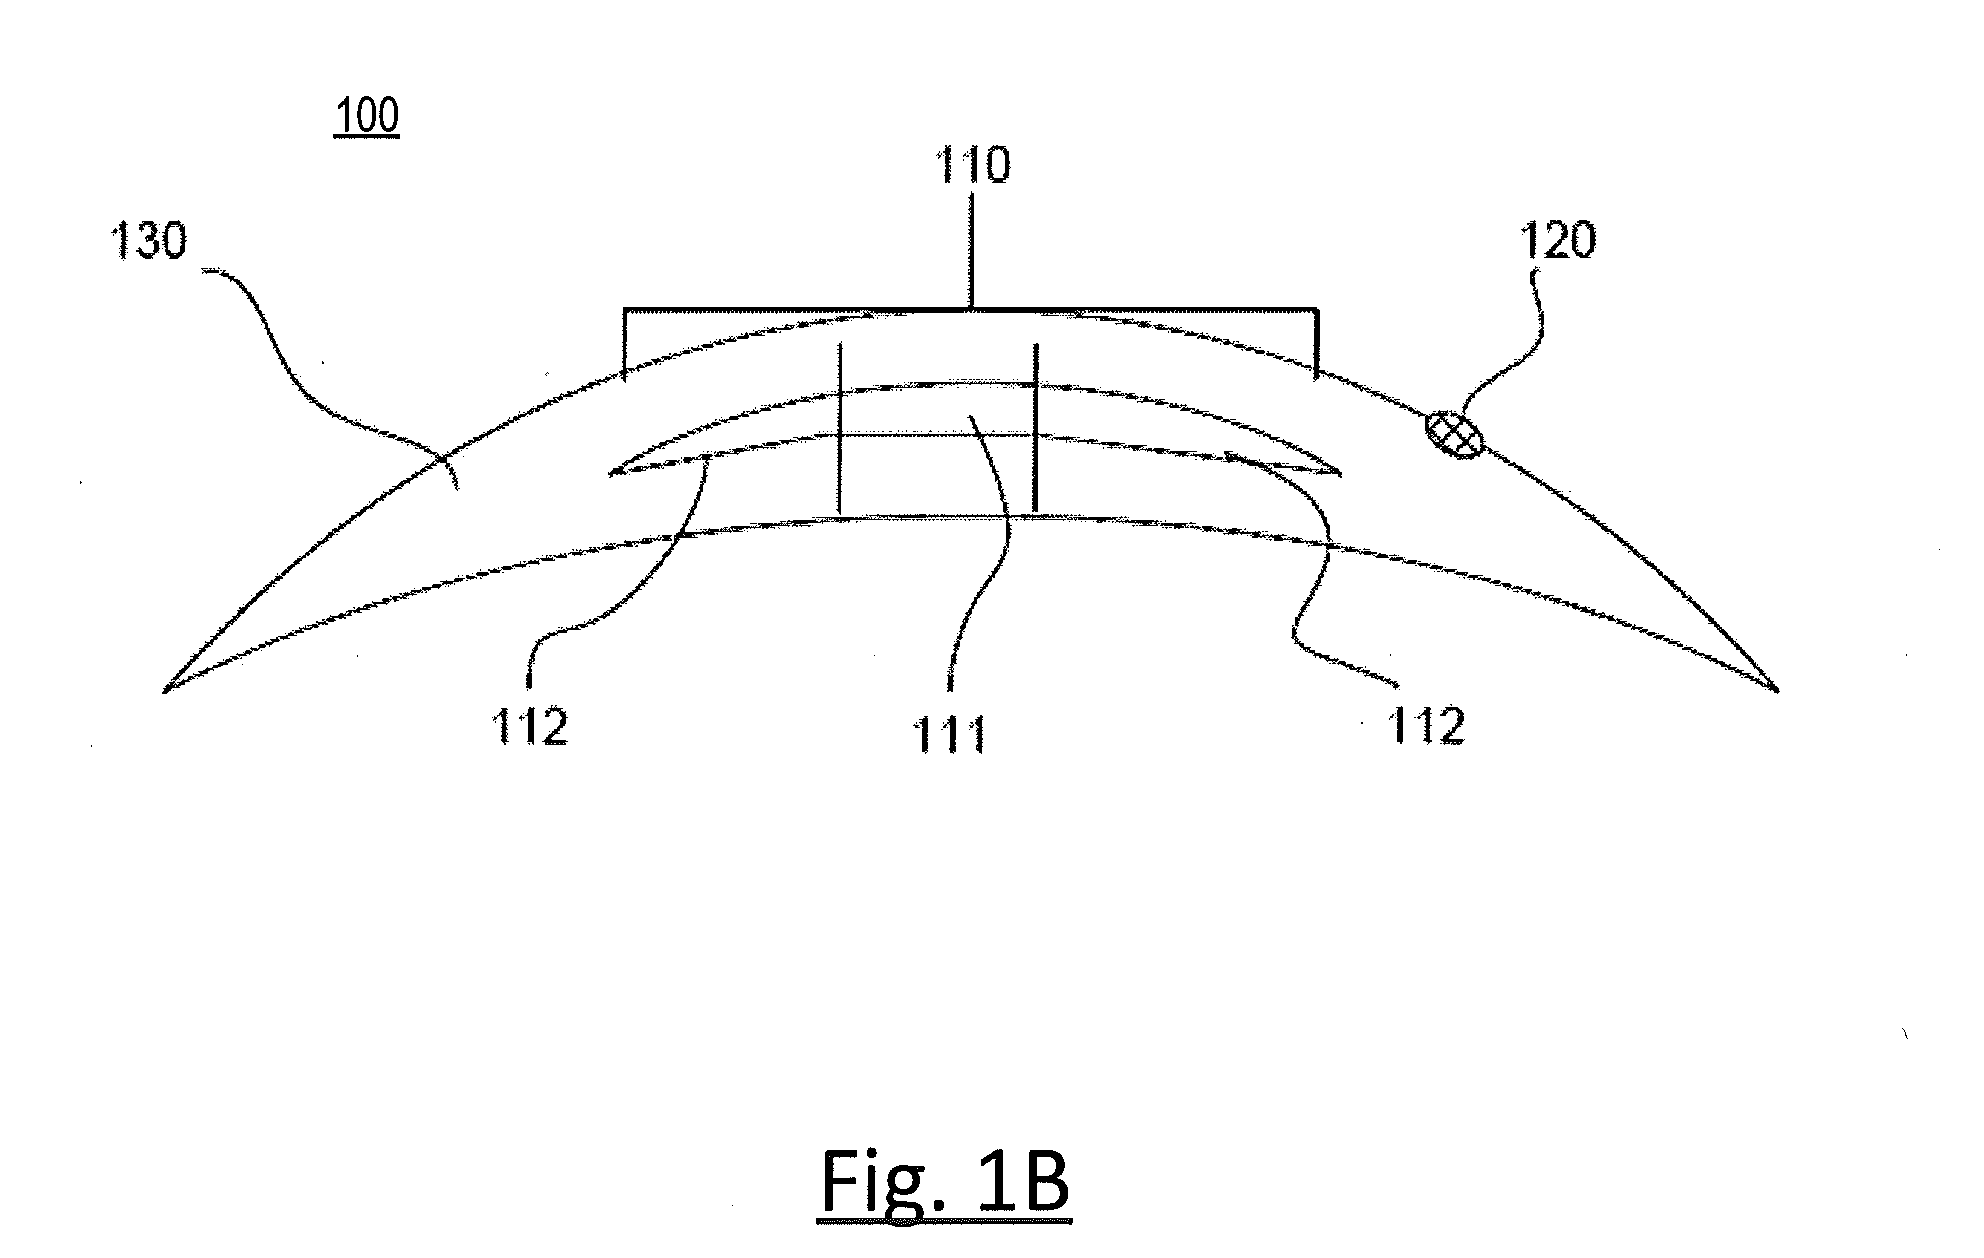 Method of manufacturing hydrogel ophthalmic devices with electronic elements